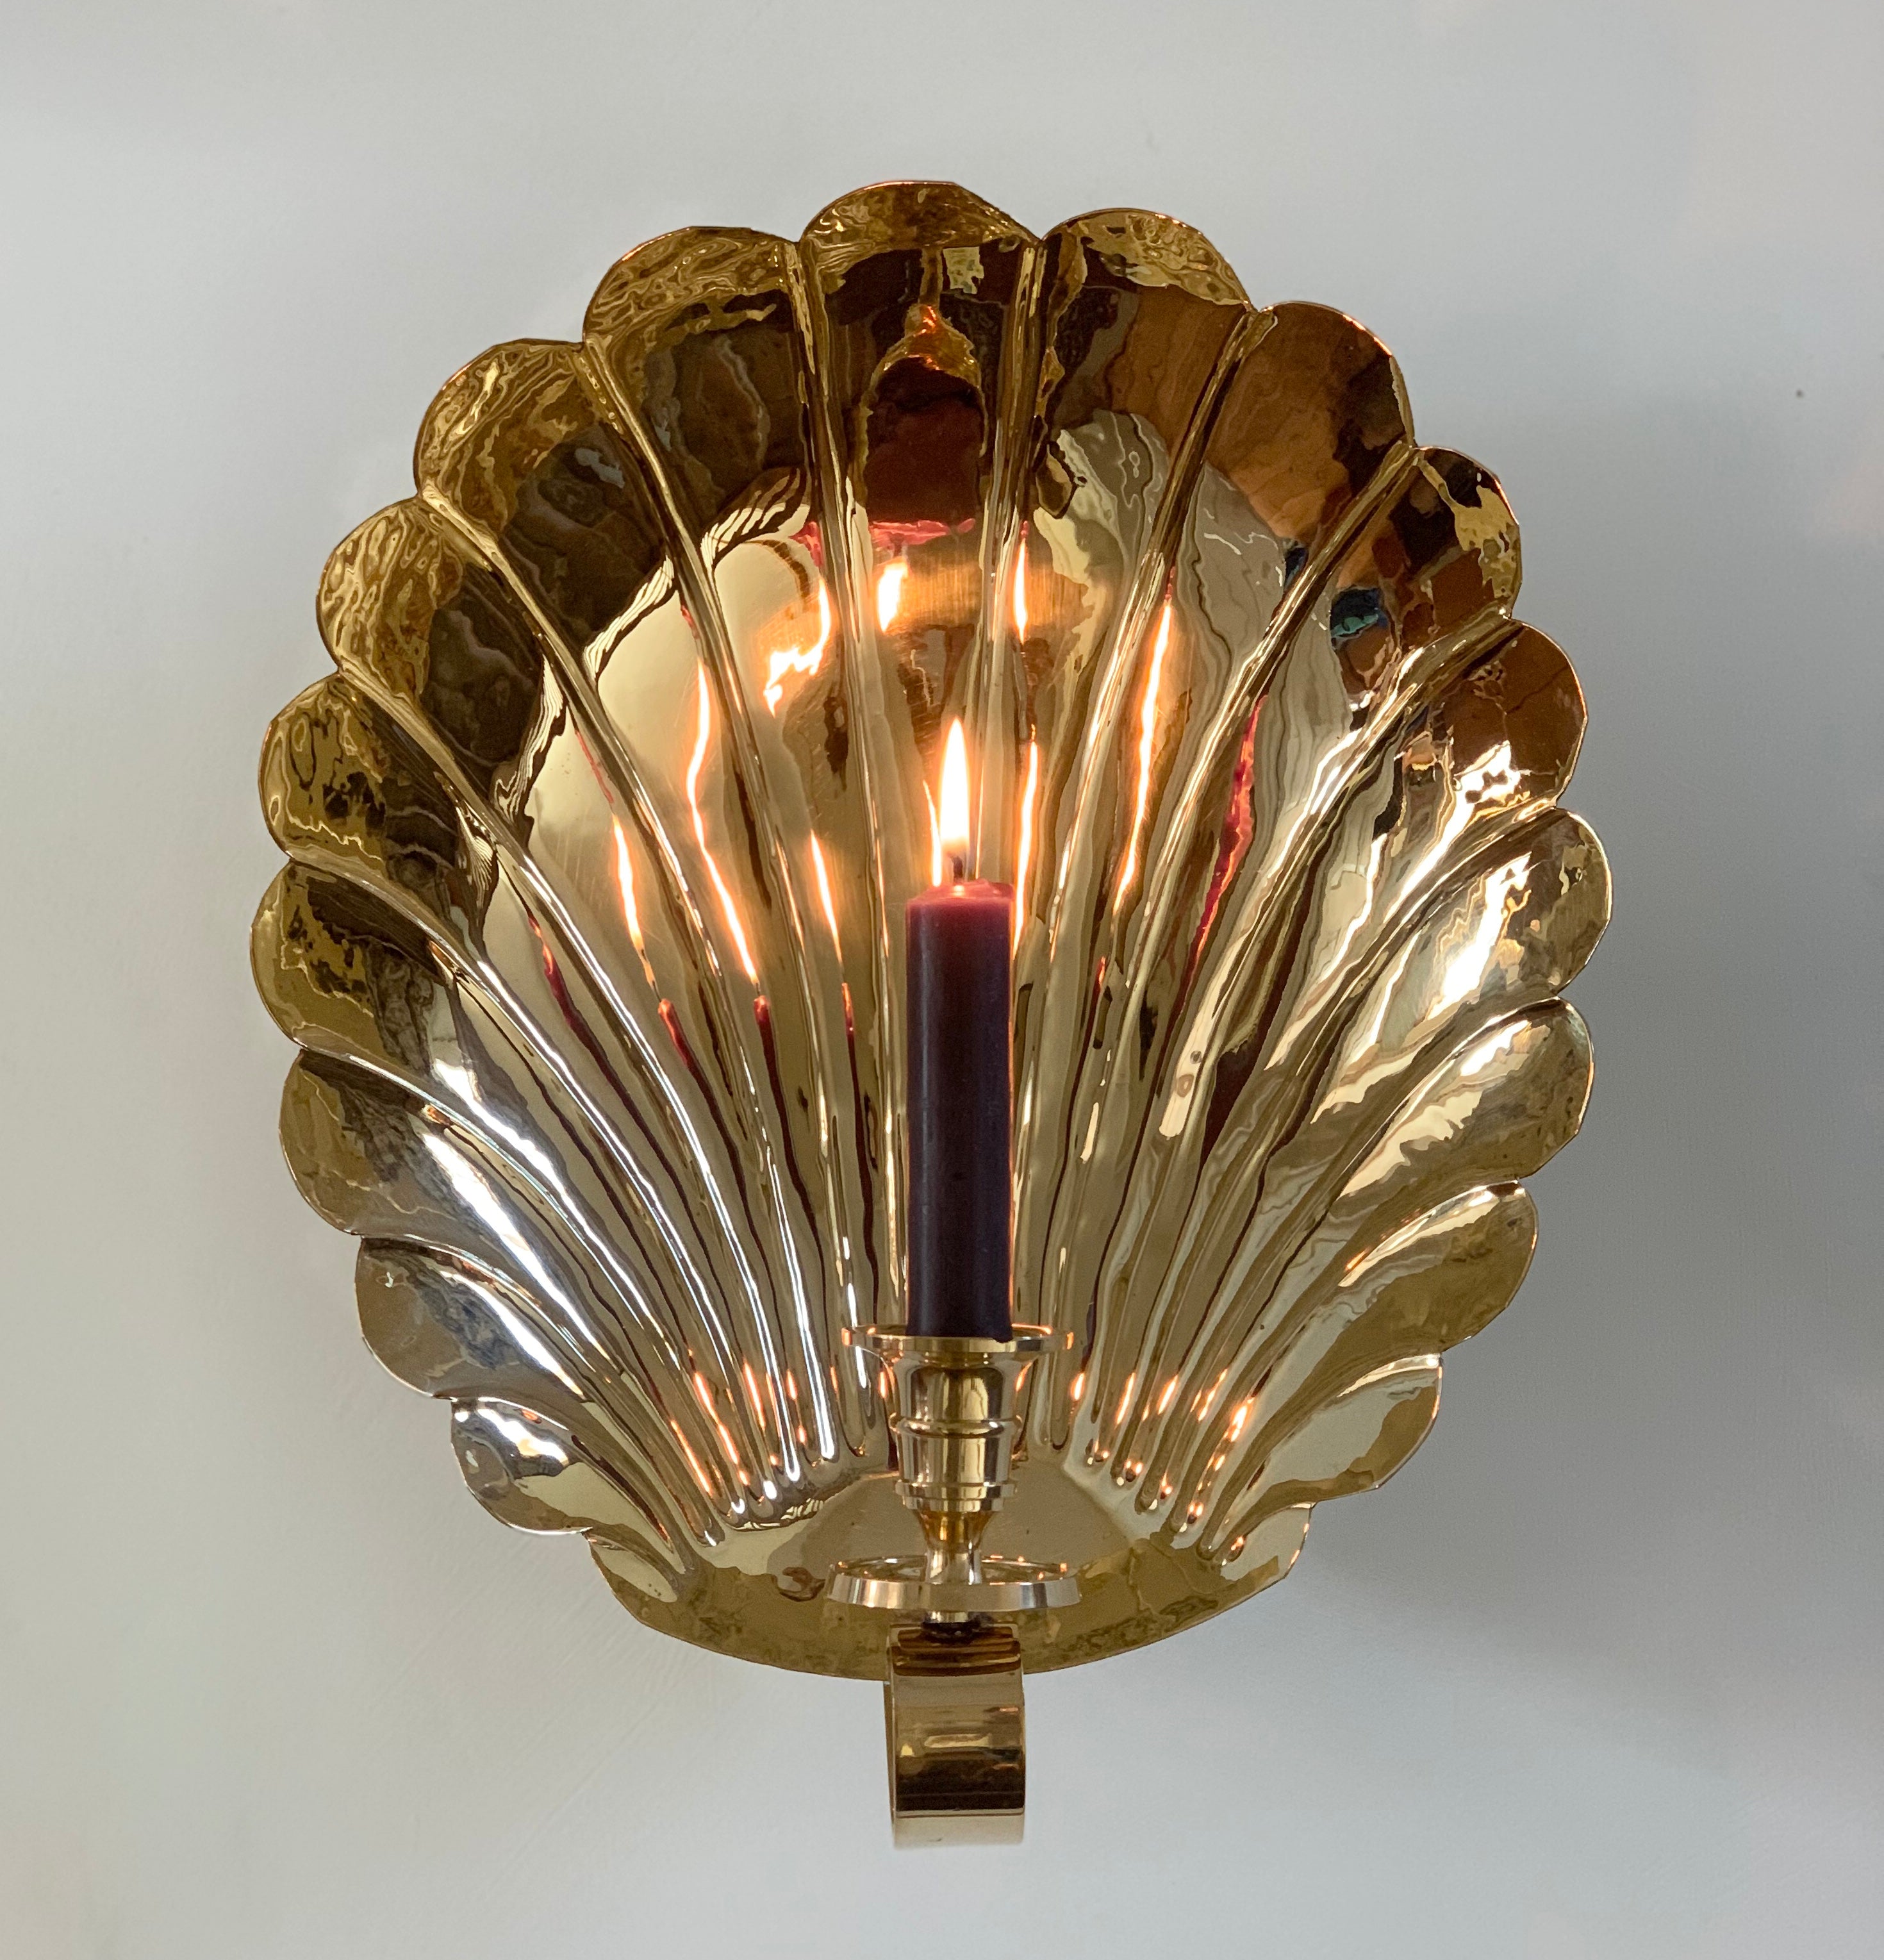 Large Scallop Candle Sconce, Polished Brass. 36 cm